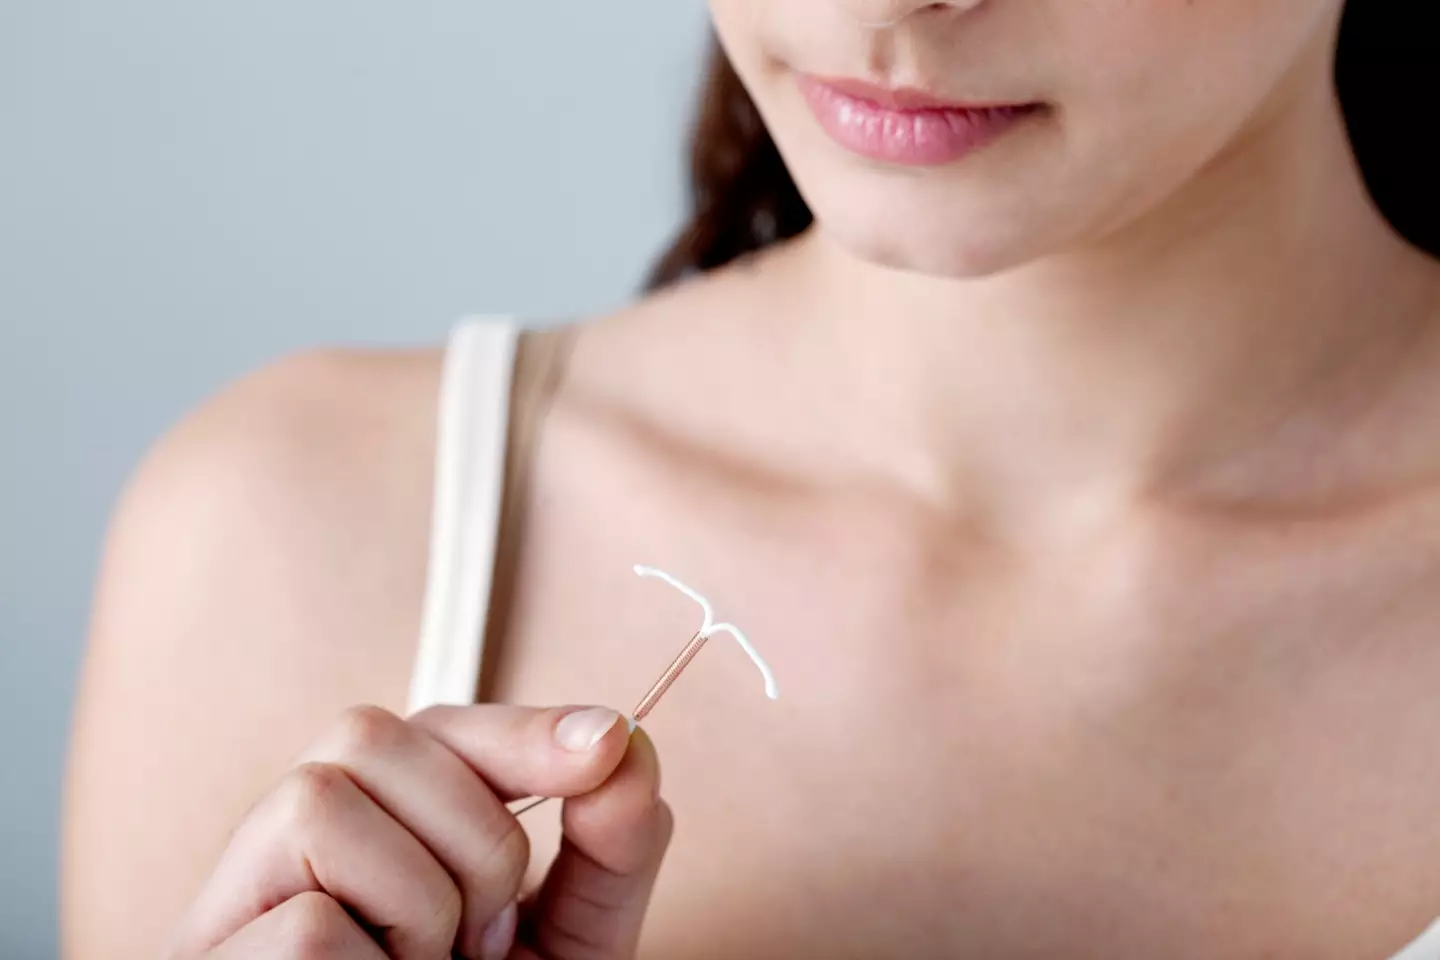 People with vaginas are campaigning for better pain relief for IUD insertions.